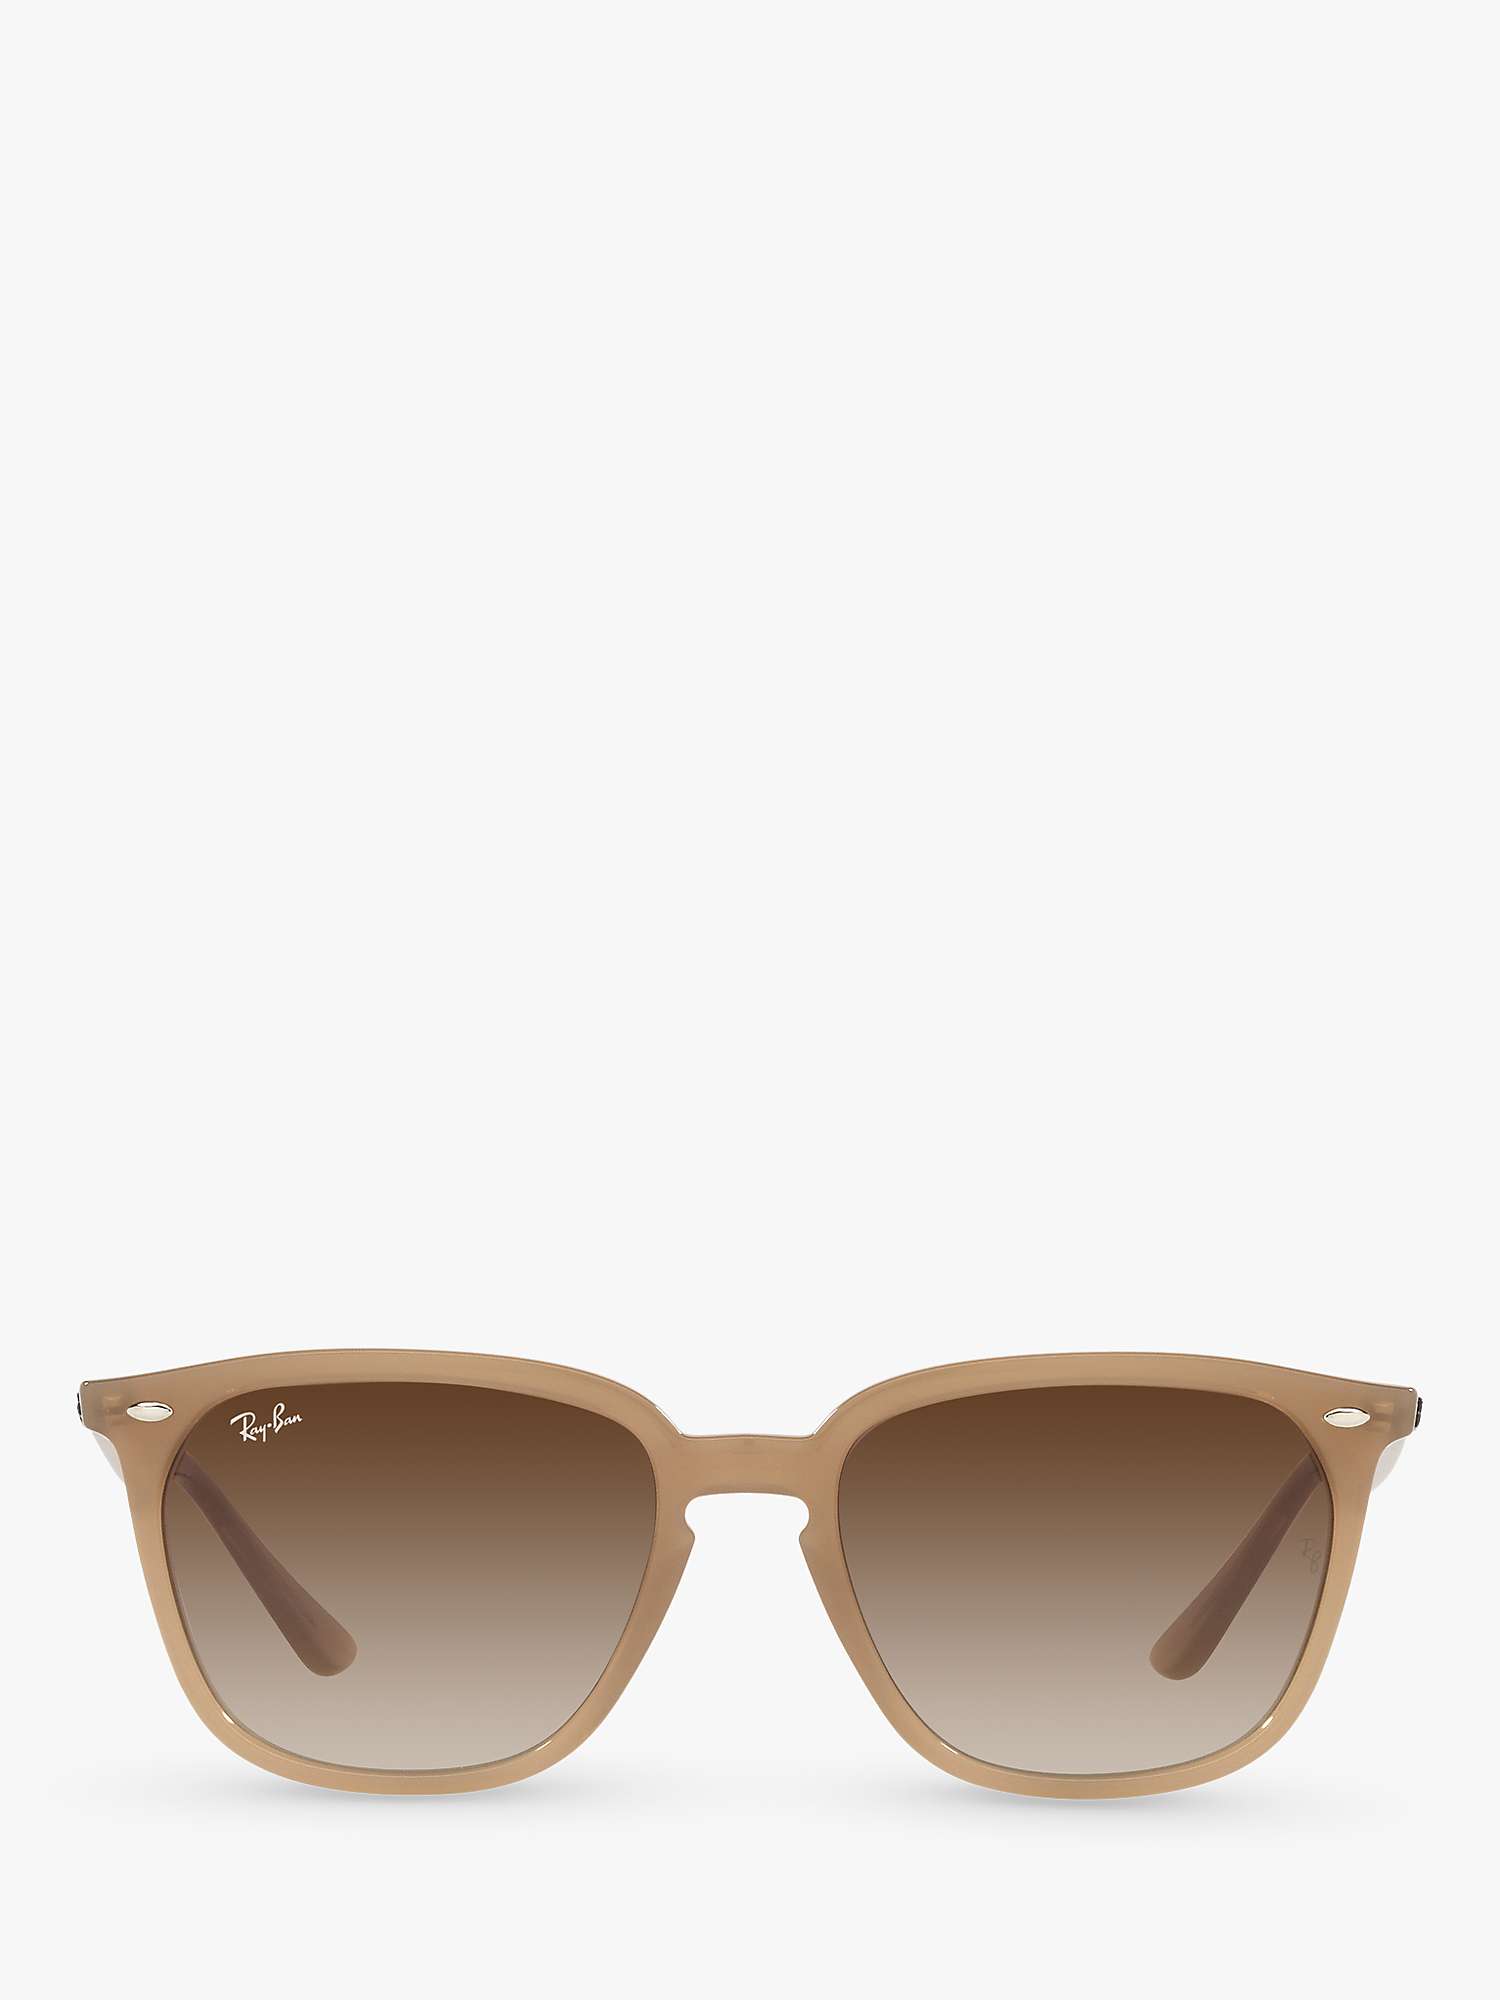 Buy Ray-Ban RB4362 Unisex Square Sunglasses, Light Brown/Brown Gradient Online at johnlewis.com